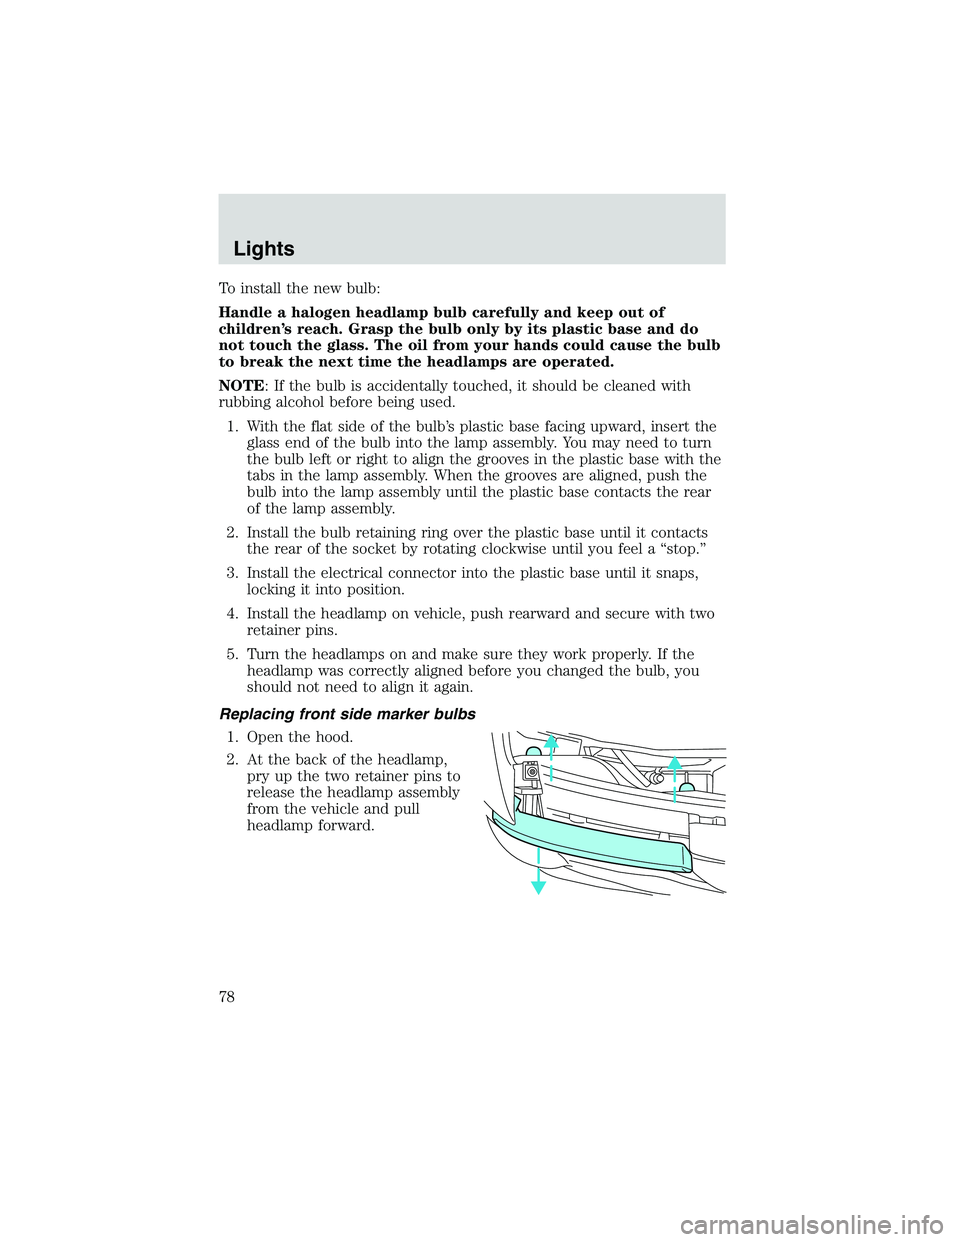 MAZDA MODEL B4000 4WD 2002  Owners Manual To install the new bulb:
Handle a halogen headlamp bulb carefully and keep out of
children’s reach. Grasp the bulb only by its plastic base and do
not touch the glass. The oil from your hands could 